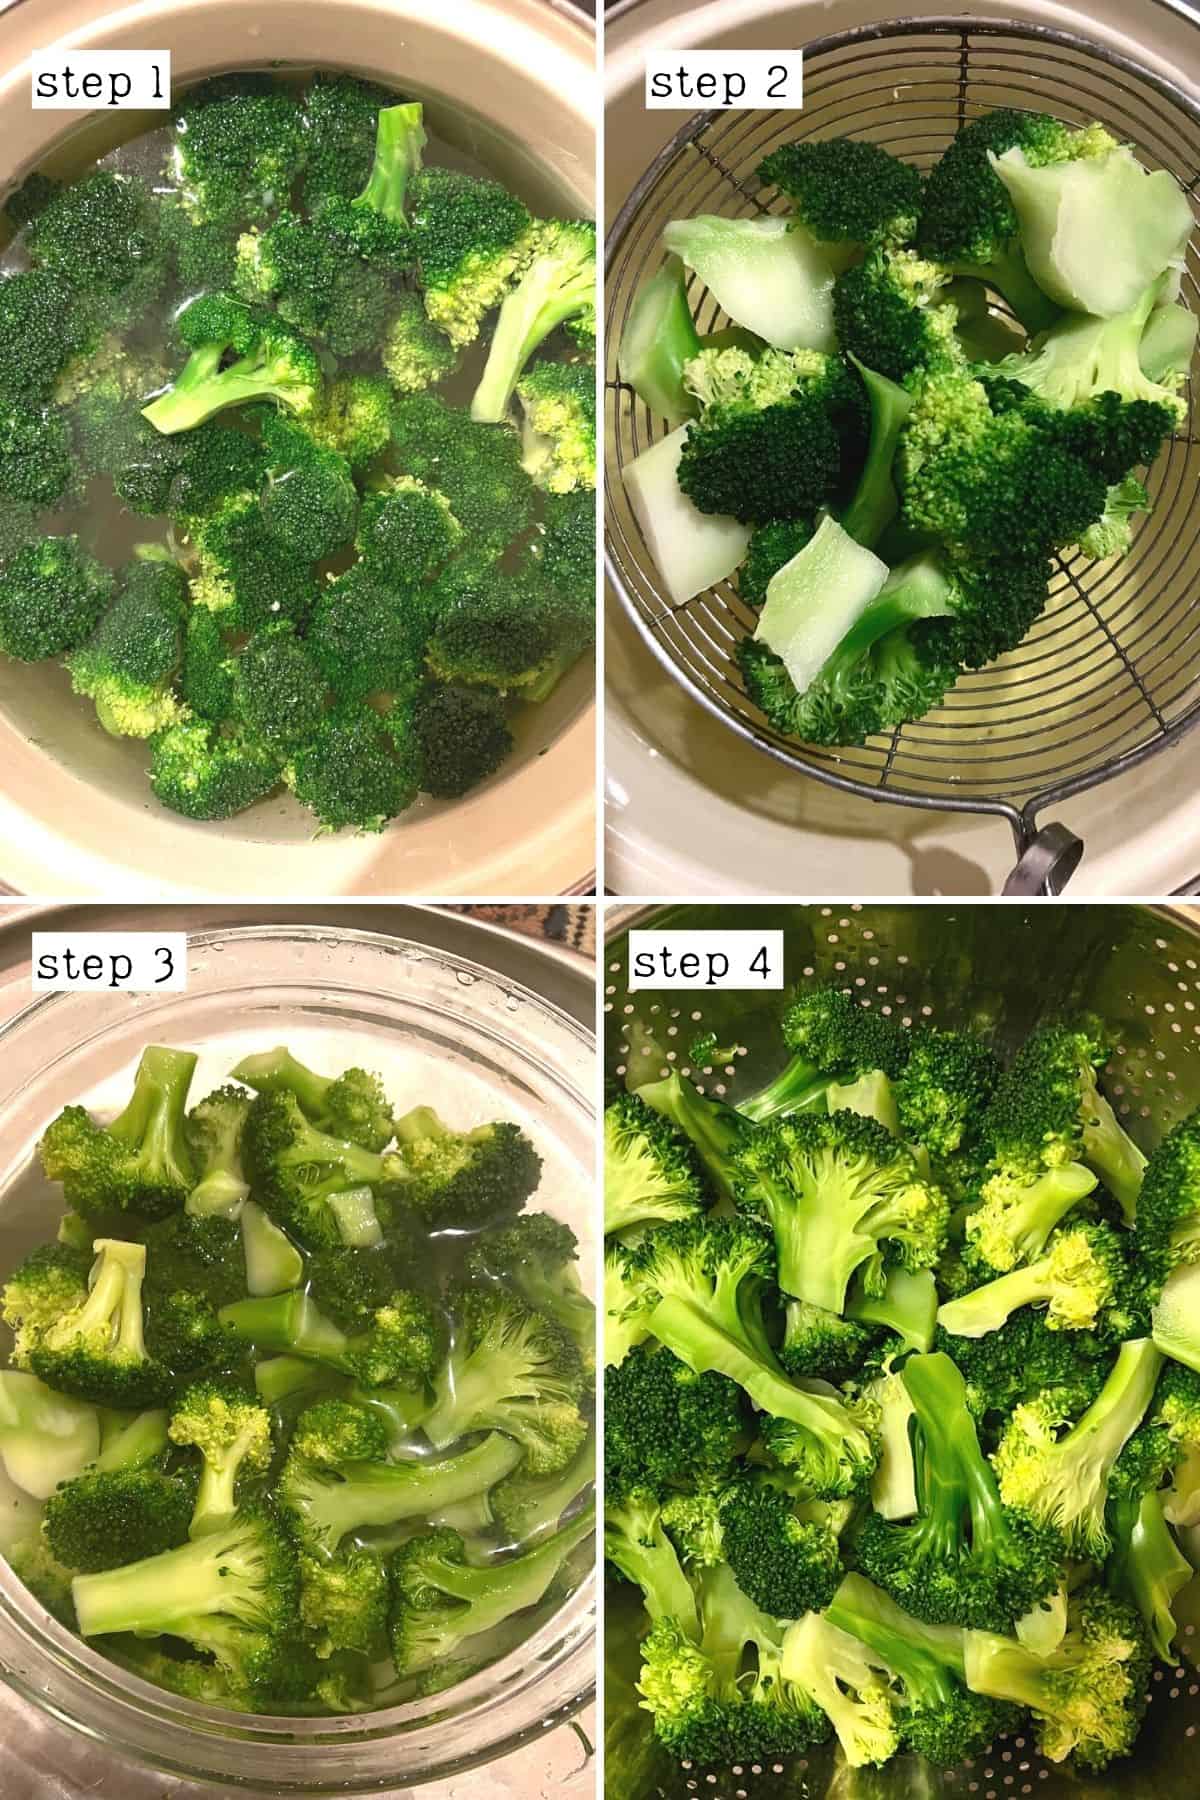 Steps for blanching broccoli